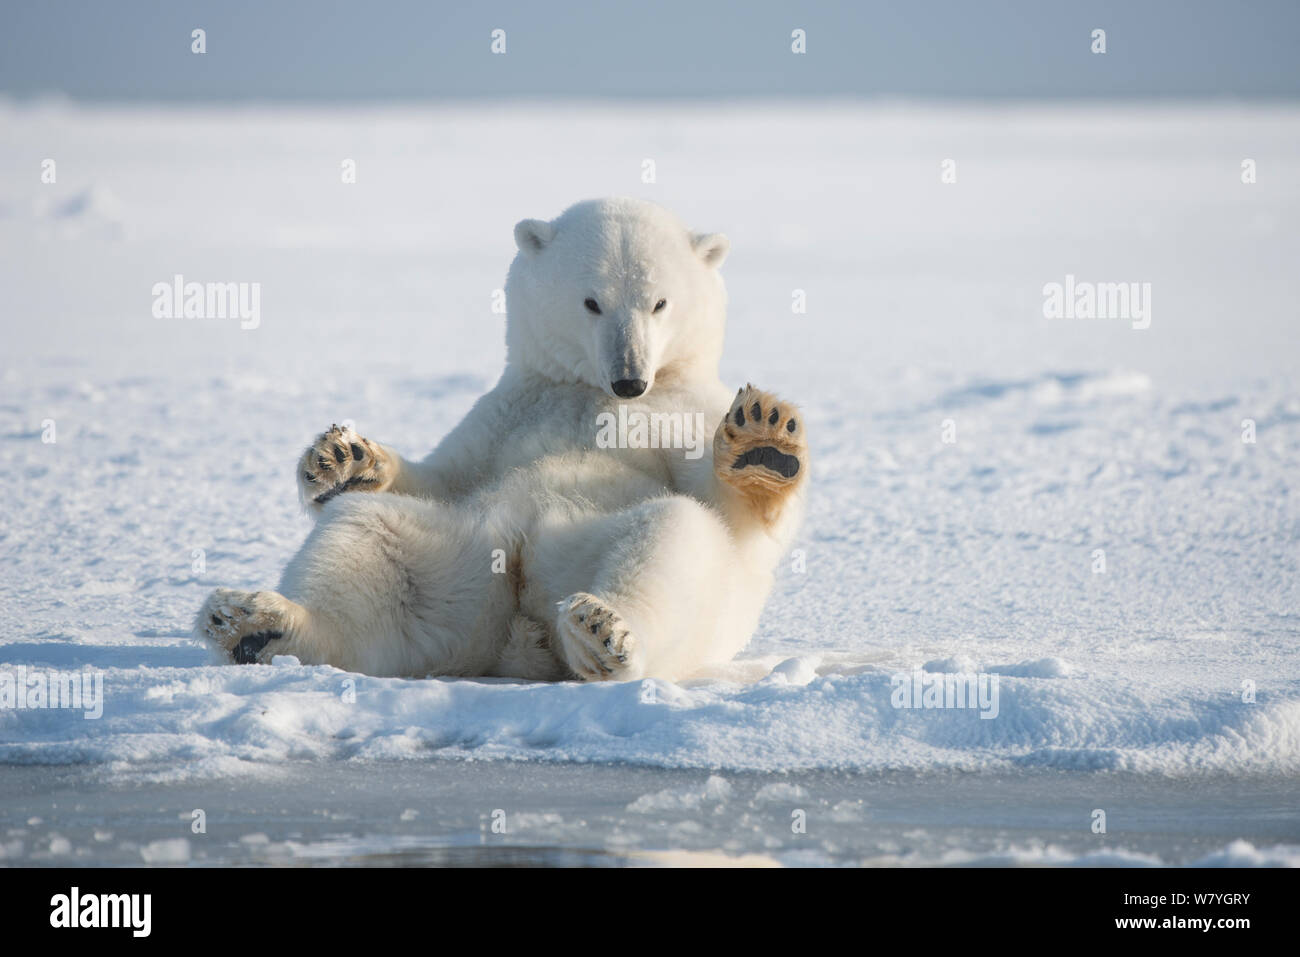 Polar bear (Ursus maritimus) young bear rolling around in snow, on newly formed pack ice during autumn freeze up, Beaufort Sea, off Arctic coast, Alaska Stock Photo